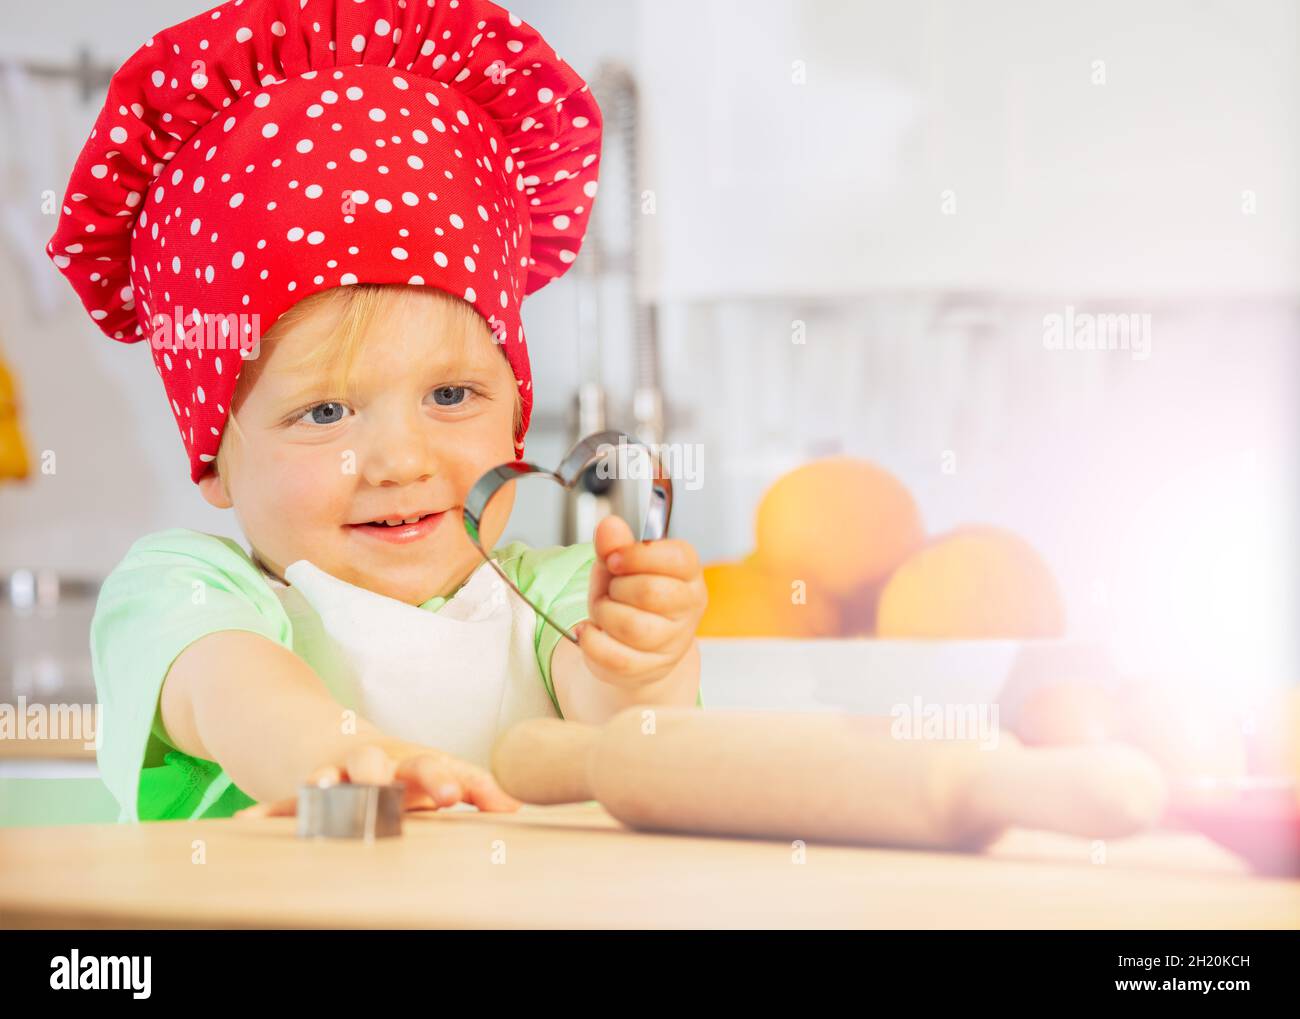 Child show heart shaped form baking at kitchen Stock Photo